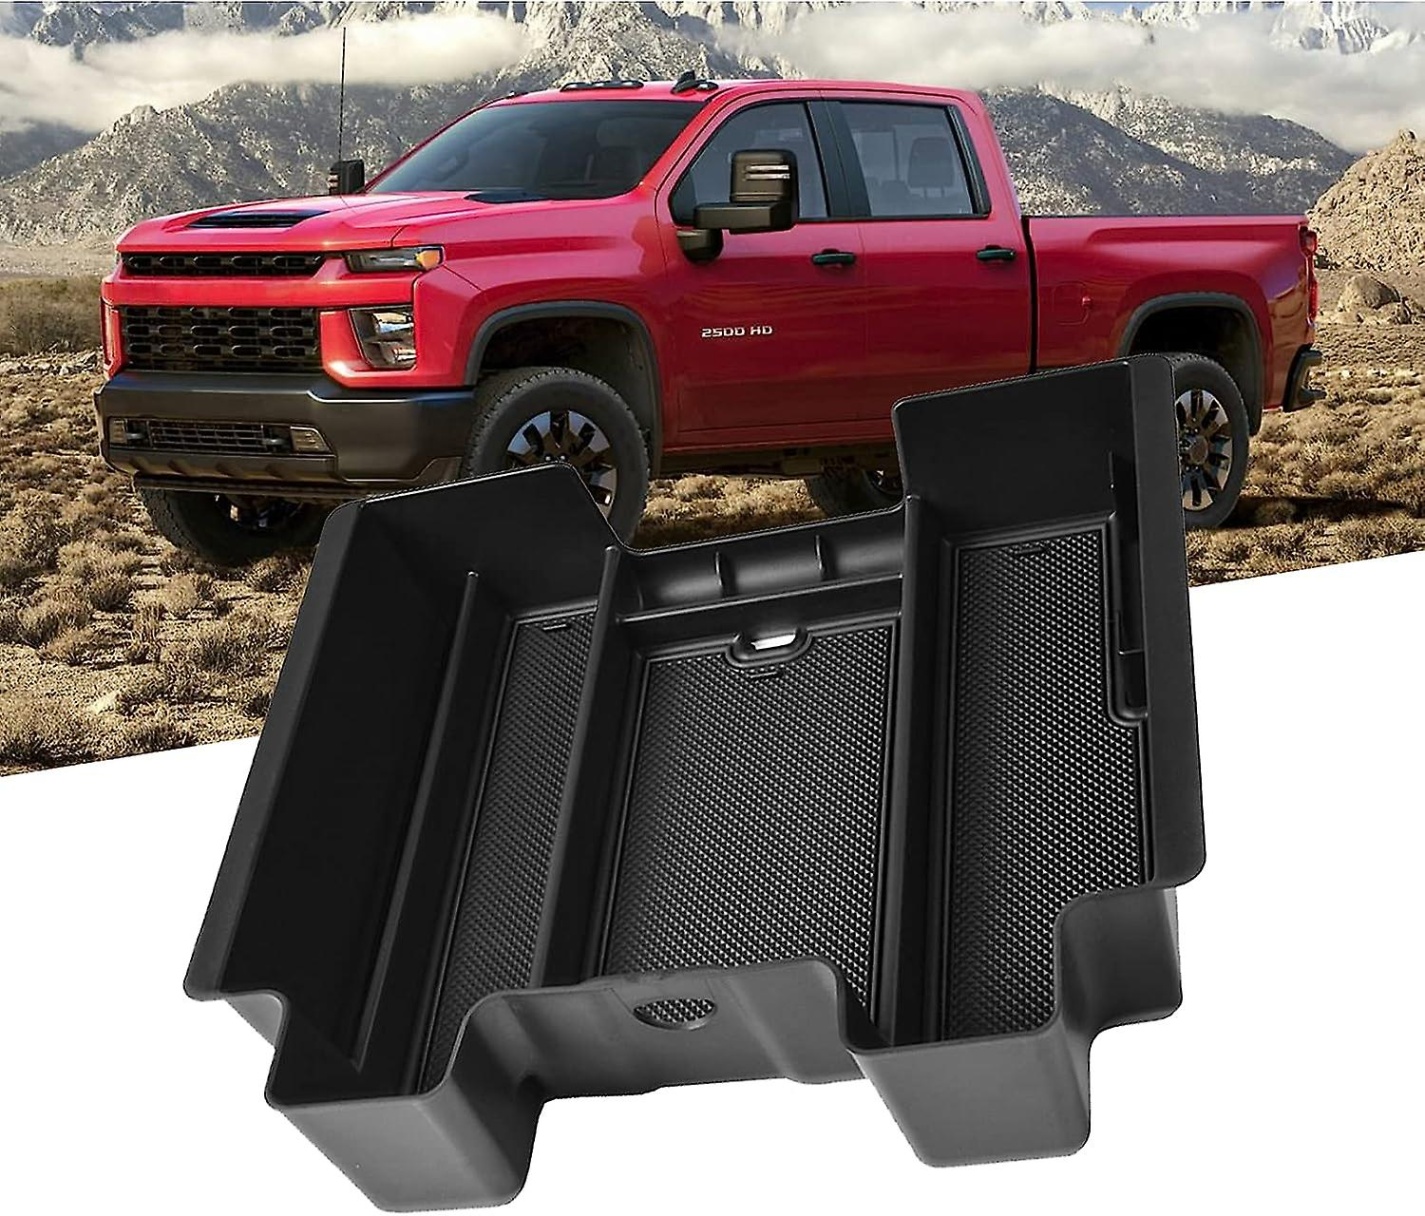 Upgrade Your Ride: Must-Have 2022 GMC Sierra 1500 Accessories For A Next-Level Drive!